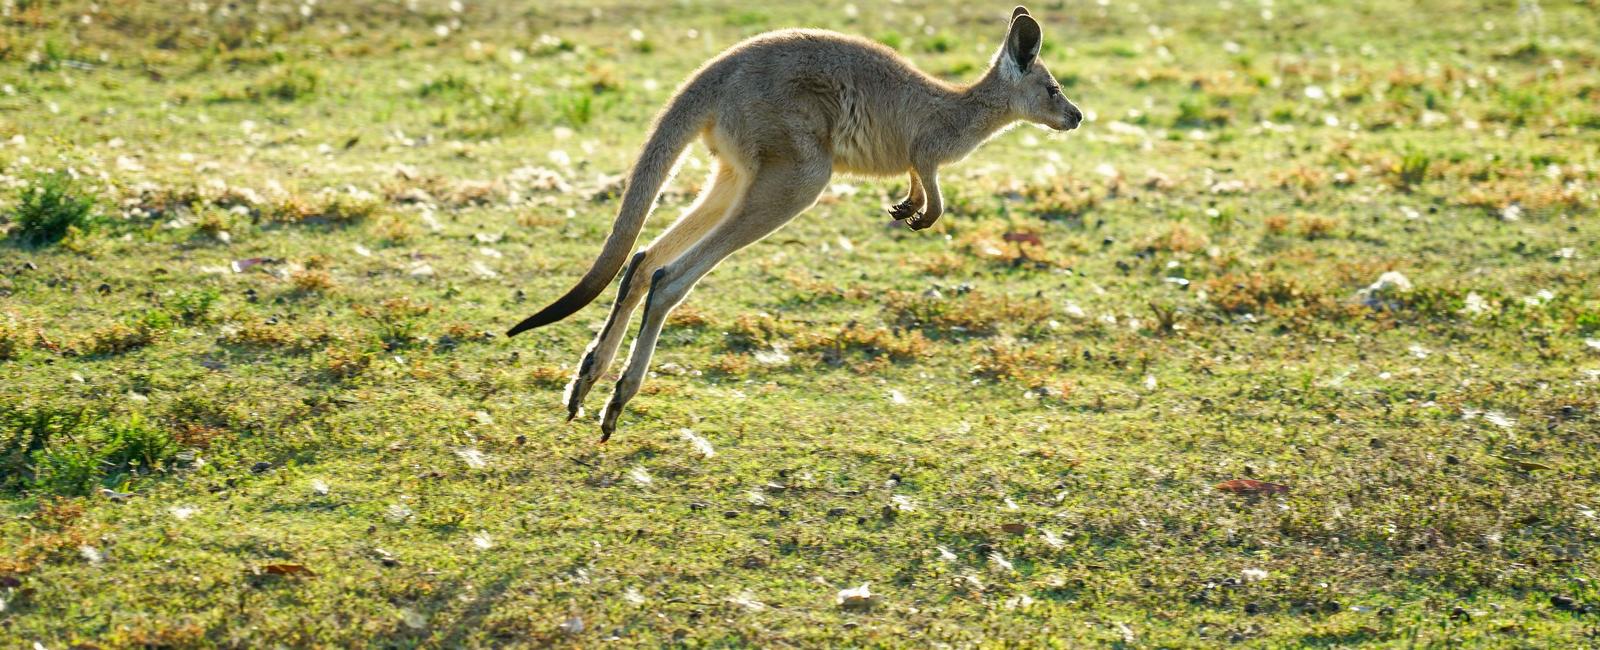 A kangaroo can t jump unless its tail is touching the ground